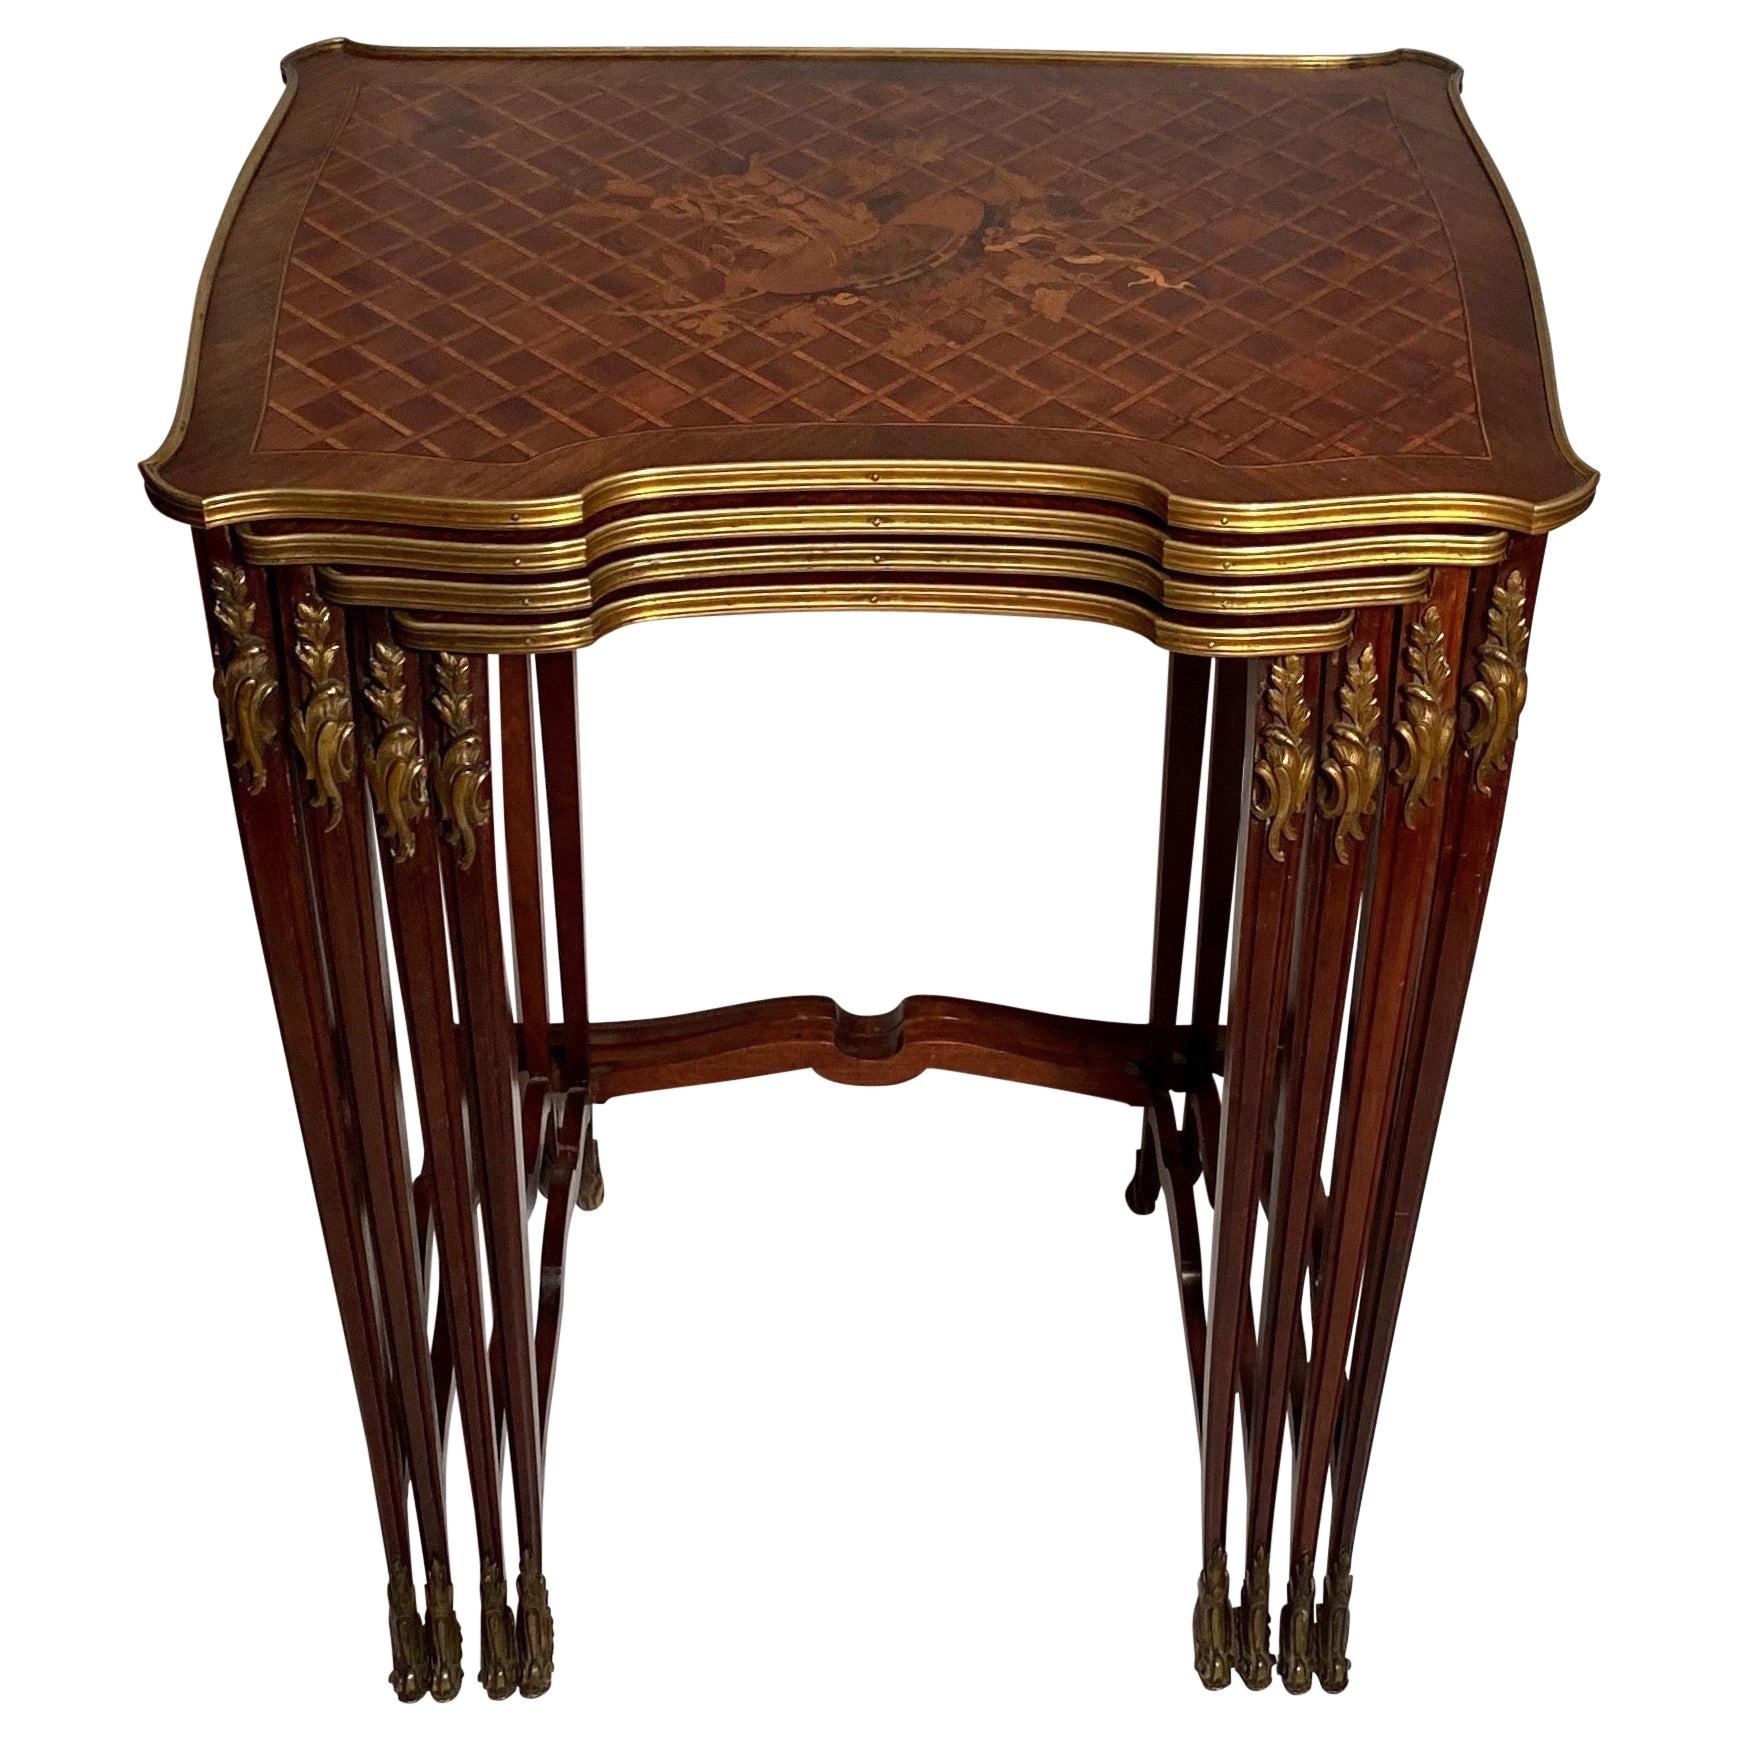 Antique French Kingswood and Satinwood Marquetry Nest of Tables, circa 1870